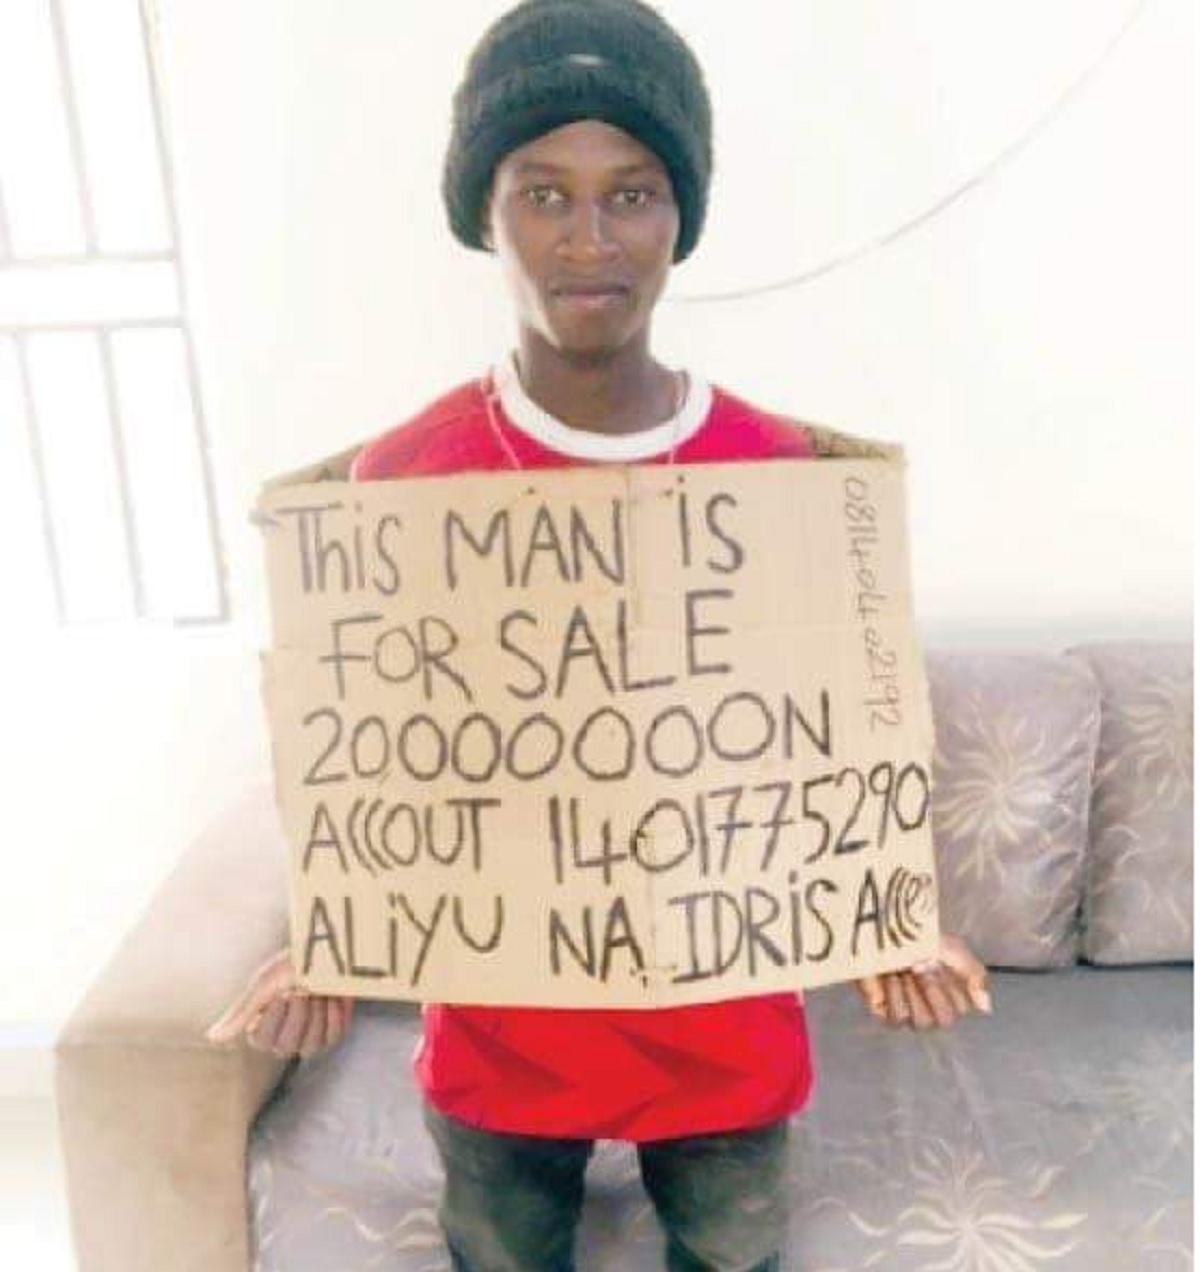 Man place advert to sell self for N20 million